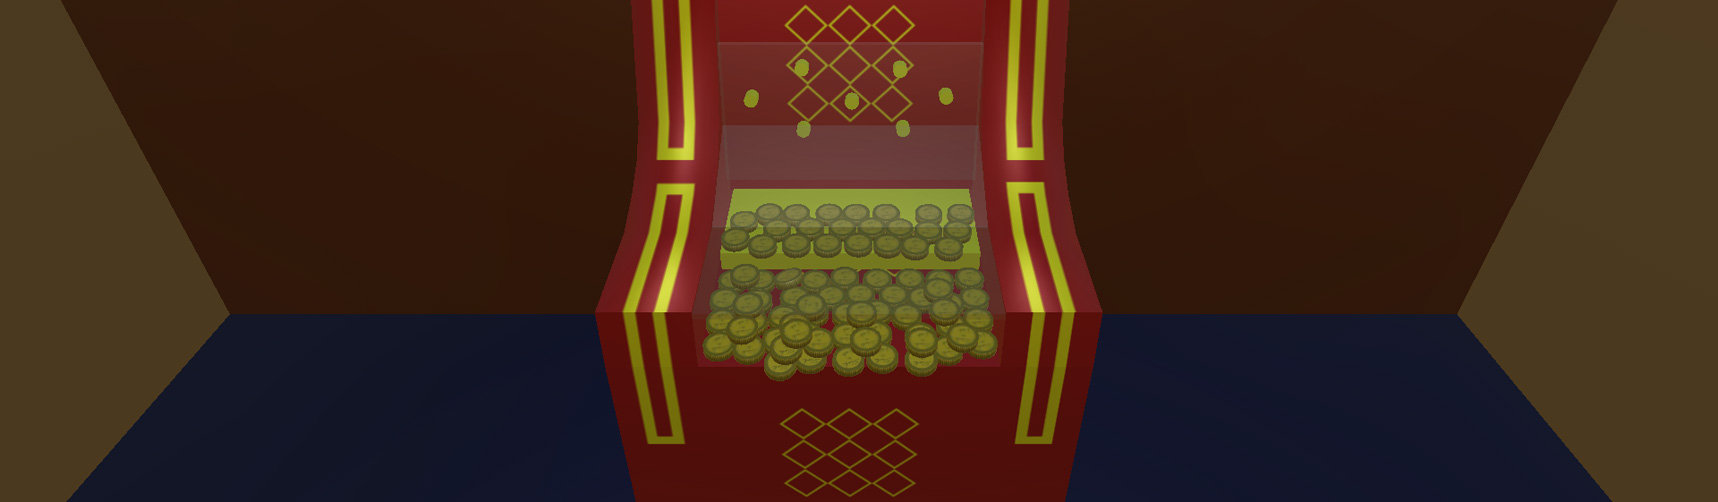 A red and gold coin pusher machine covered in coins